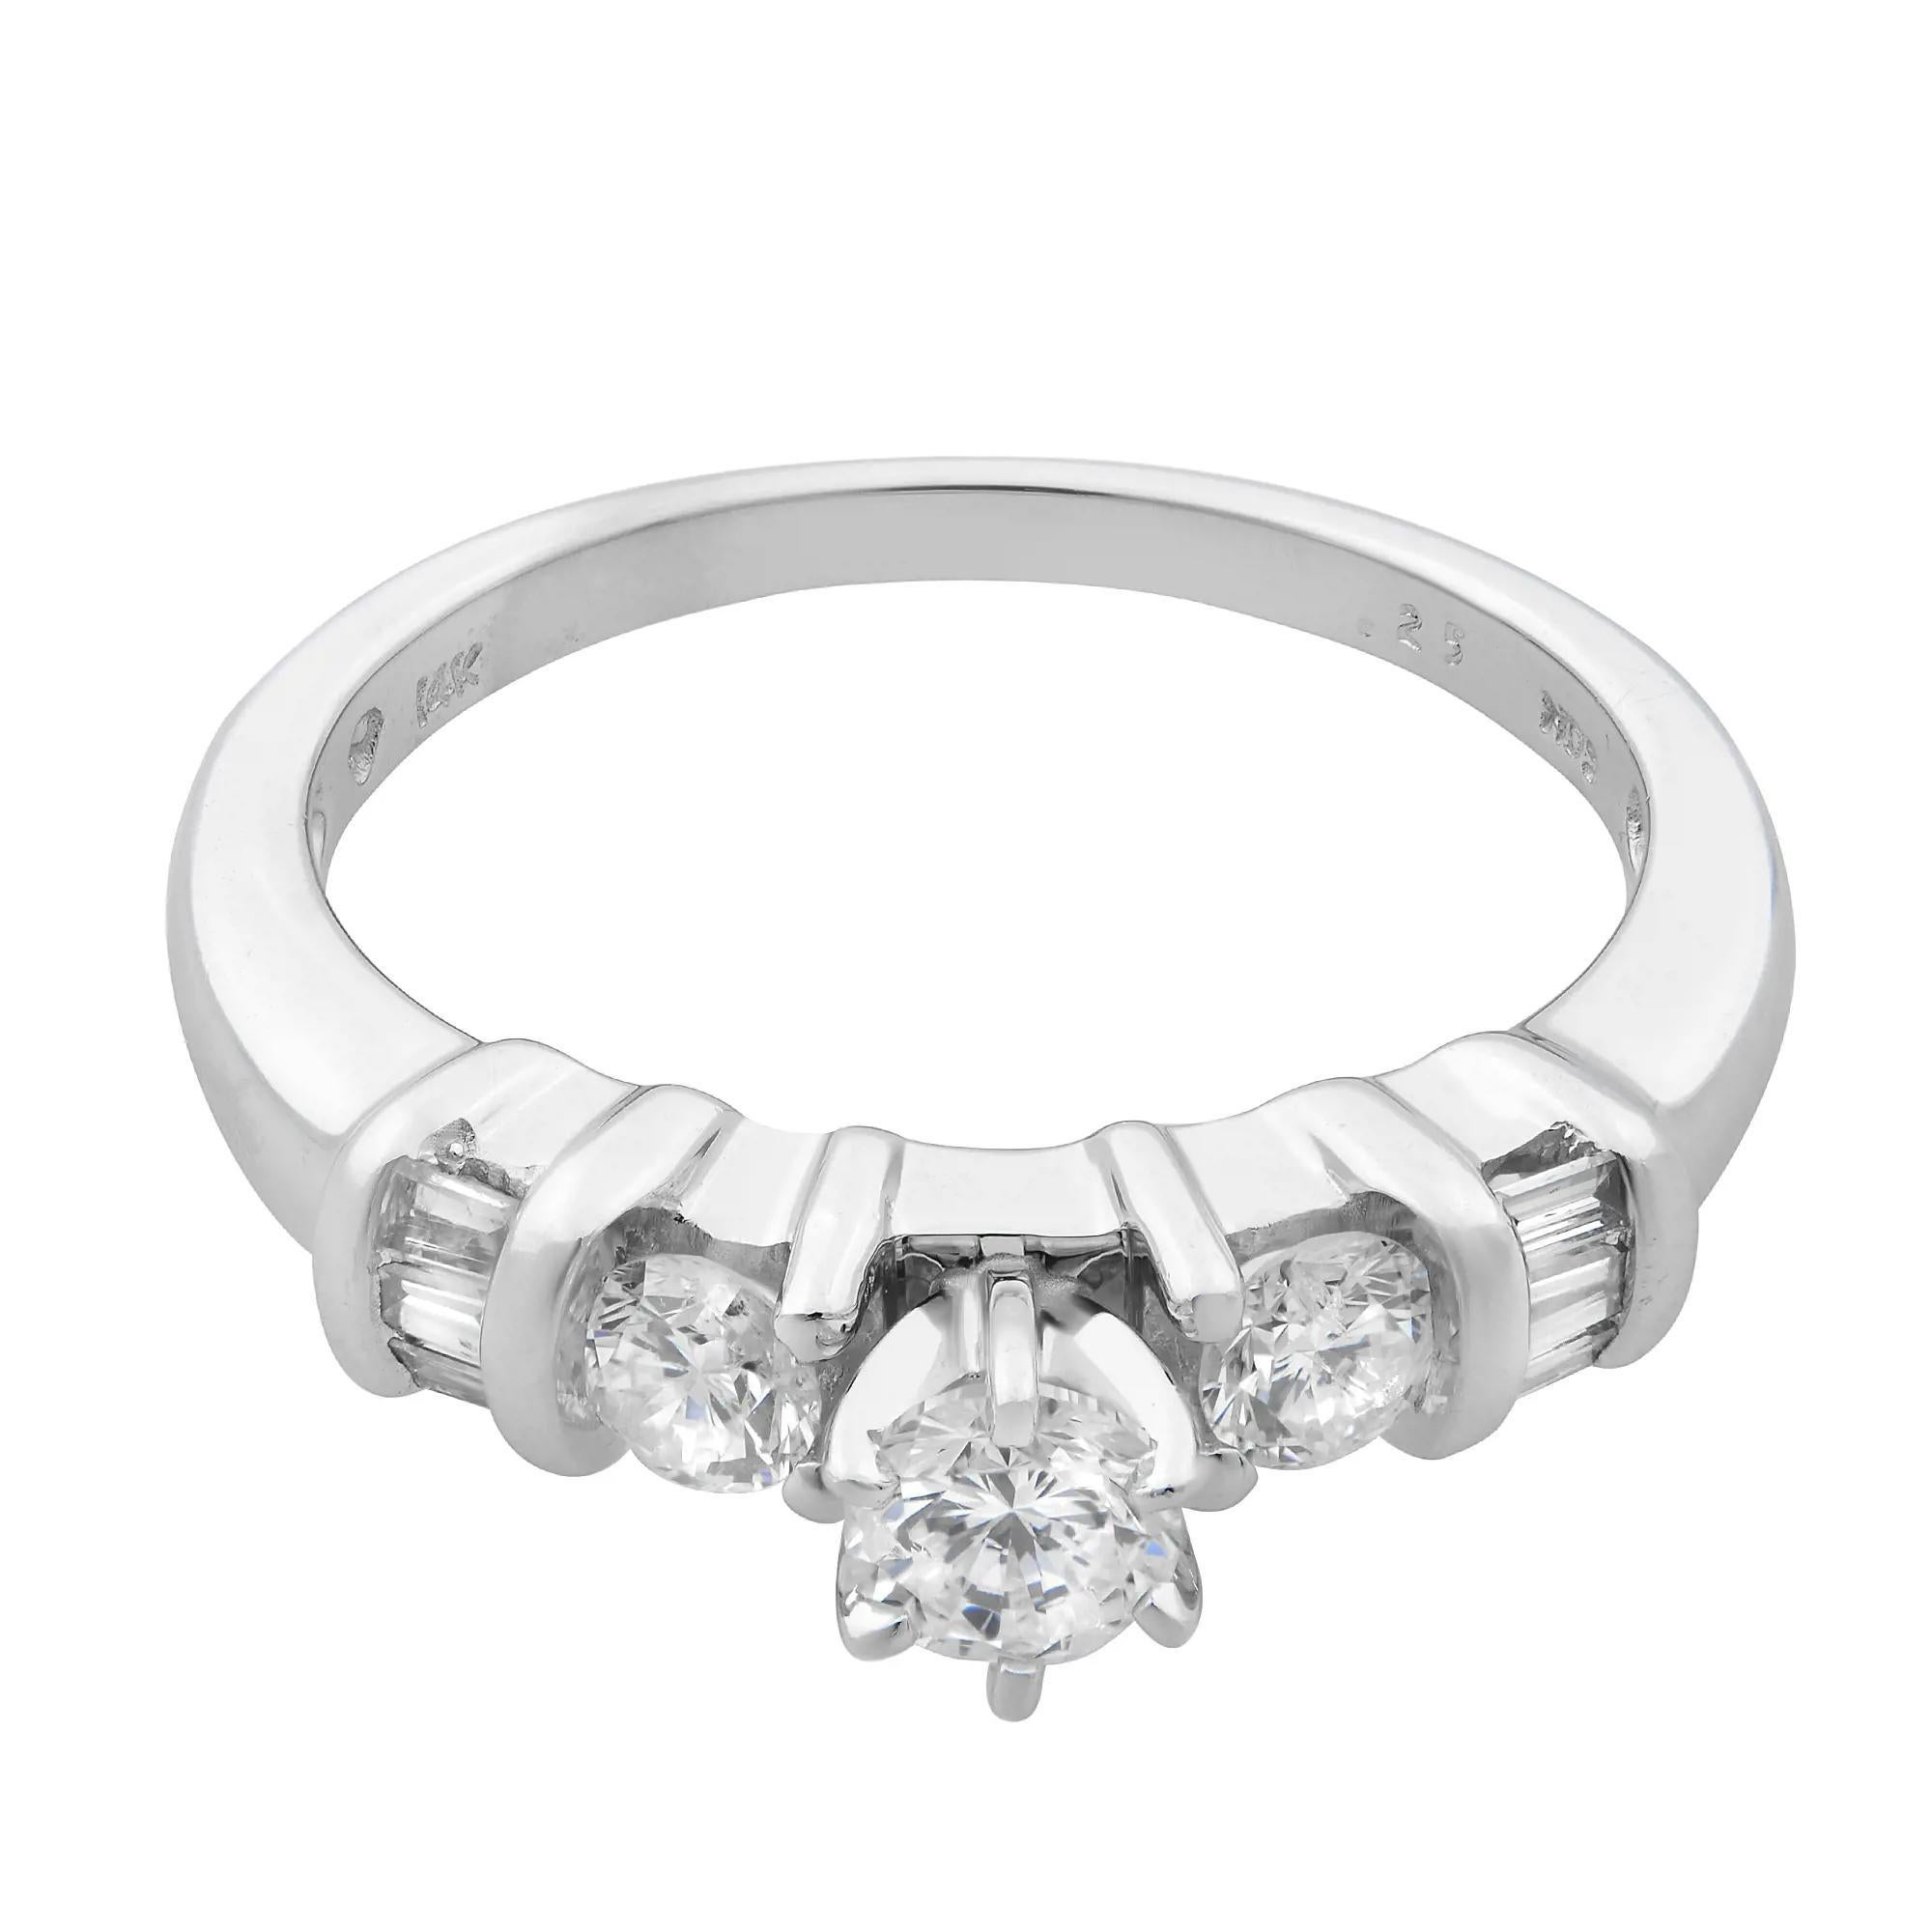 This beautiful ladies engagement ring is crafted in 14k white gold. It features a center prong set round brilliant cut diamond with baguette and round cut diamonds on each side. Total diamond weight: 0.50 carat. Diamond quality: G-H color and VS-SI